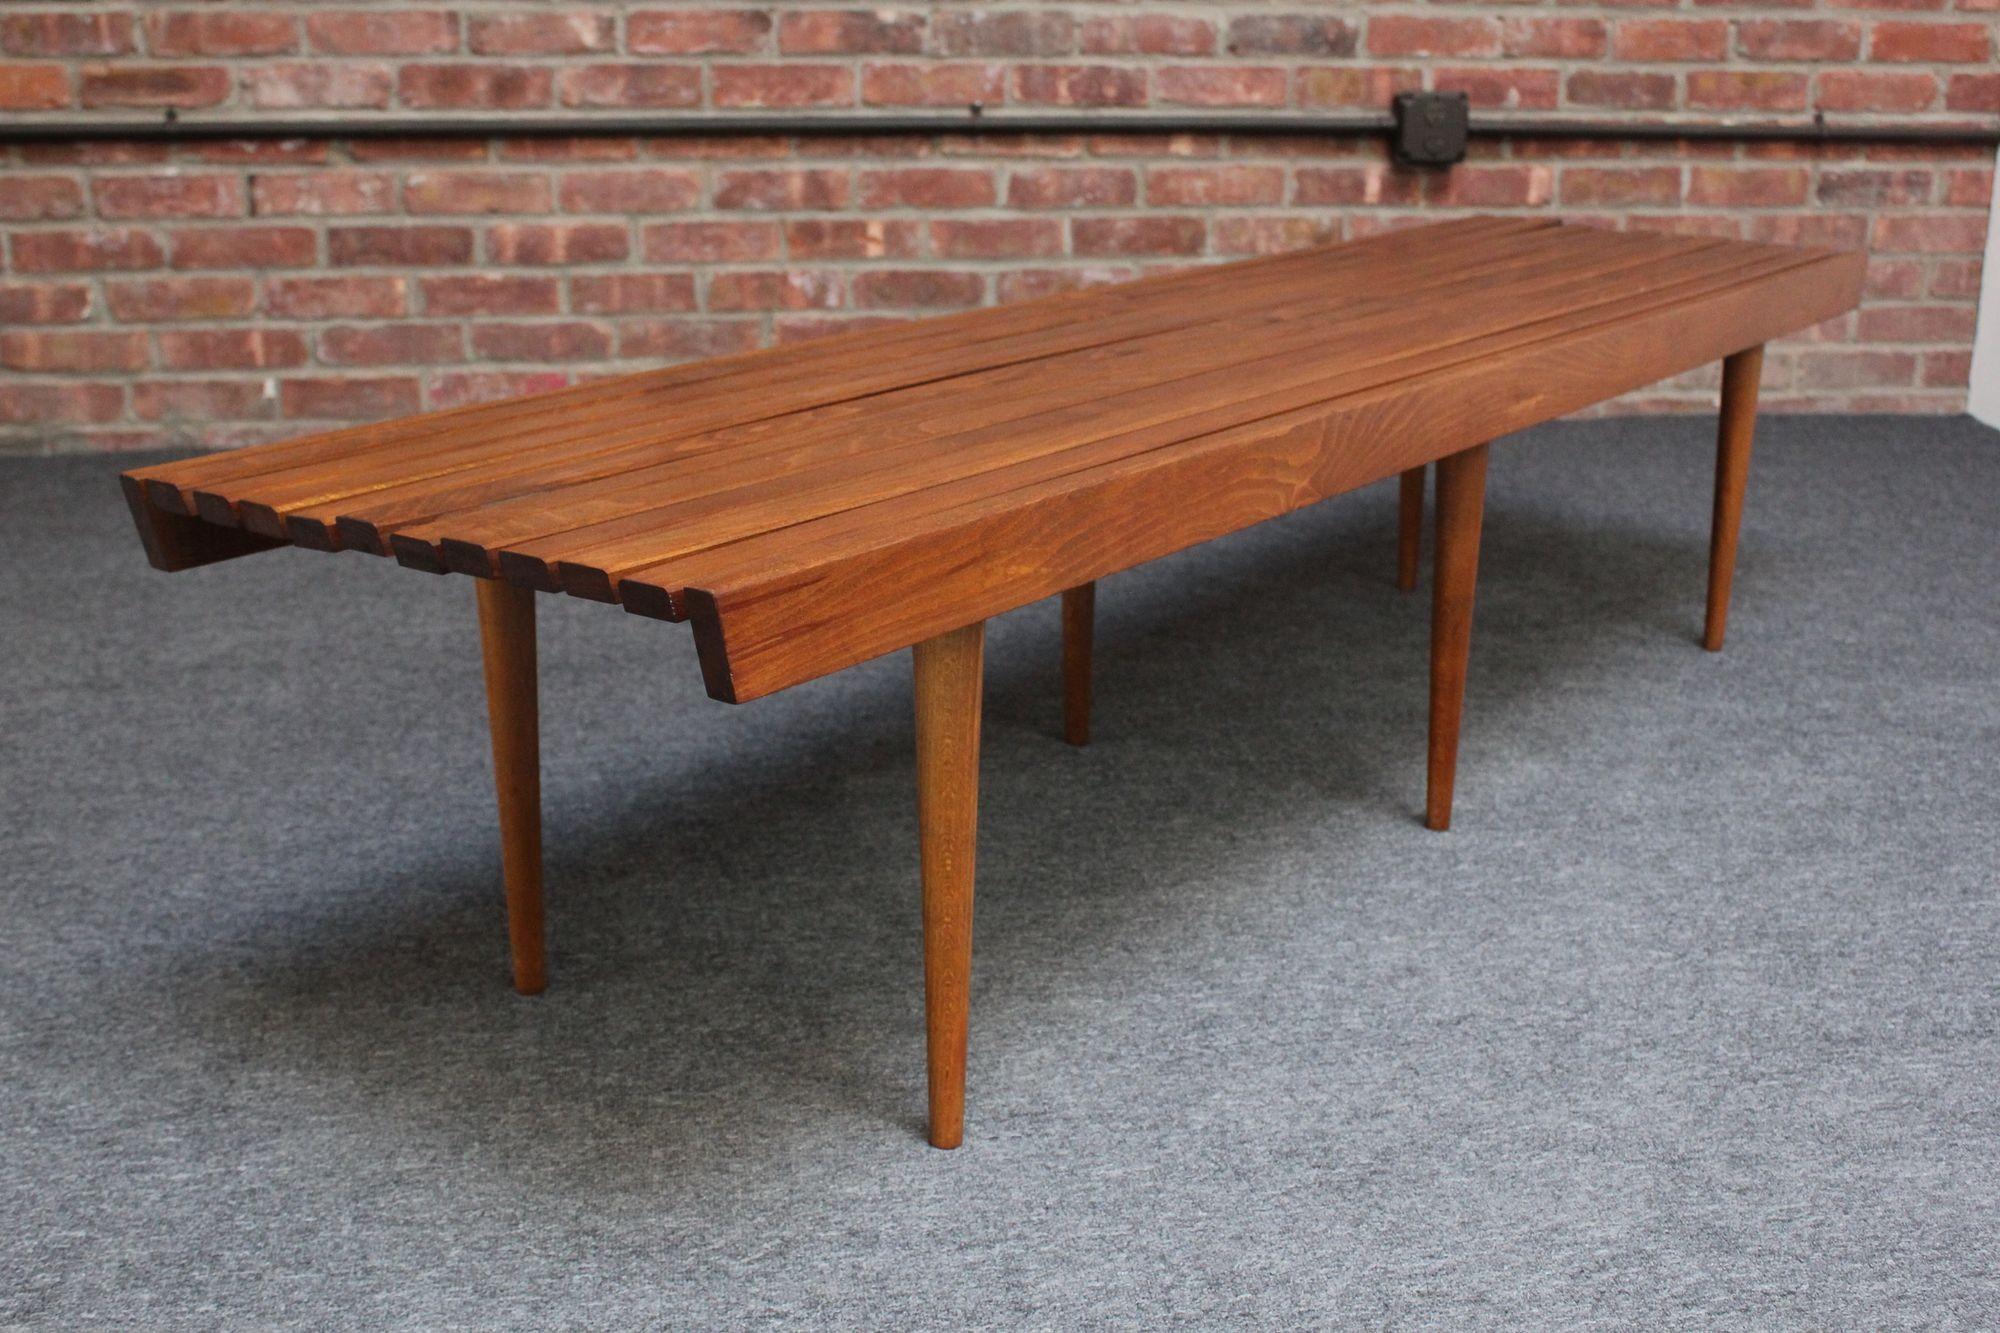 Classic Mid-Century American Modern slatted walnut bench or coffee table supported by six, slim, tapered legs (ca. 1950s, USA).
Newly refinished condition but light wear and slight warping to some of the slats remain (warping is subtle and typical